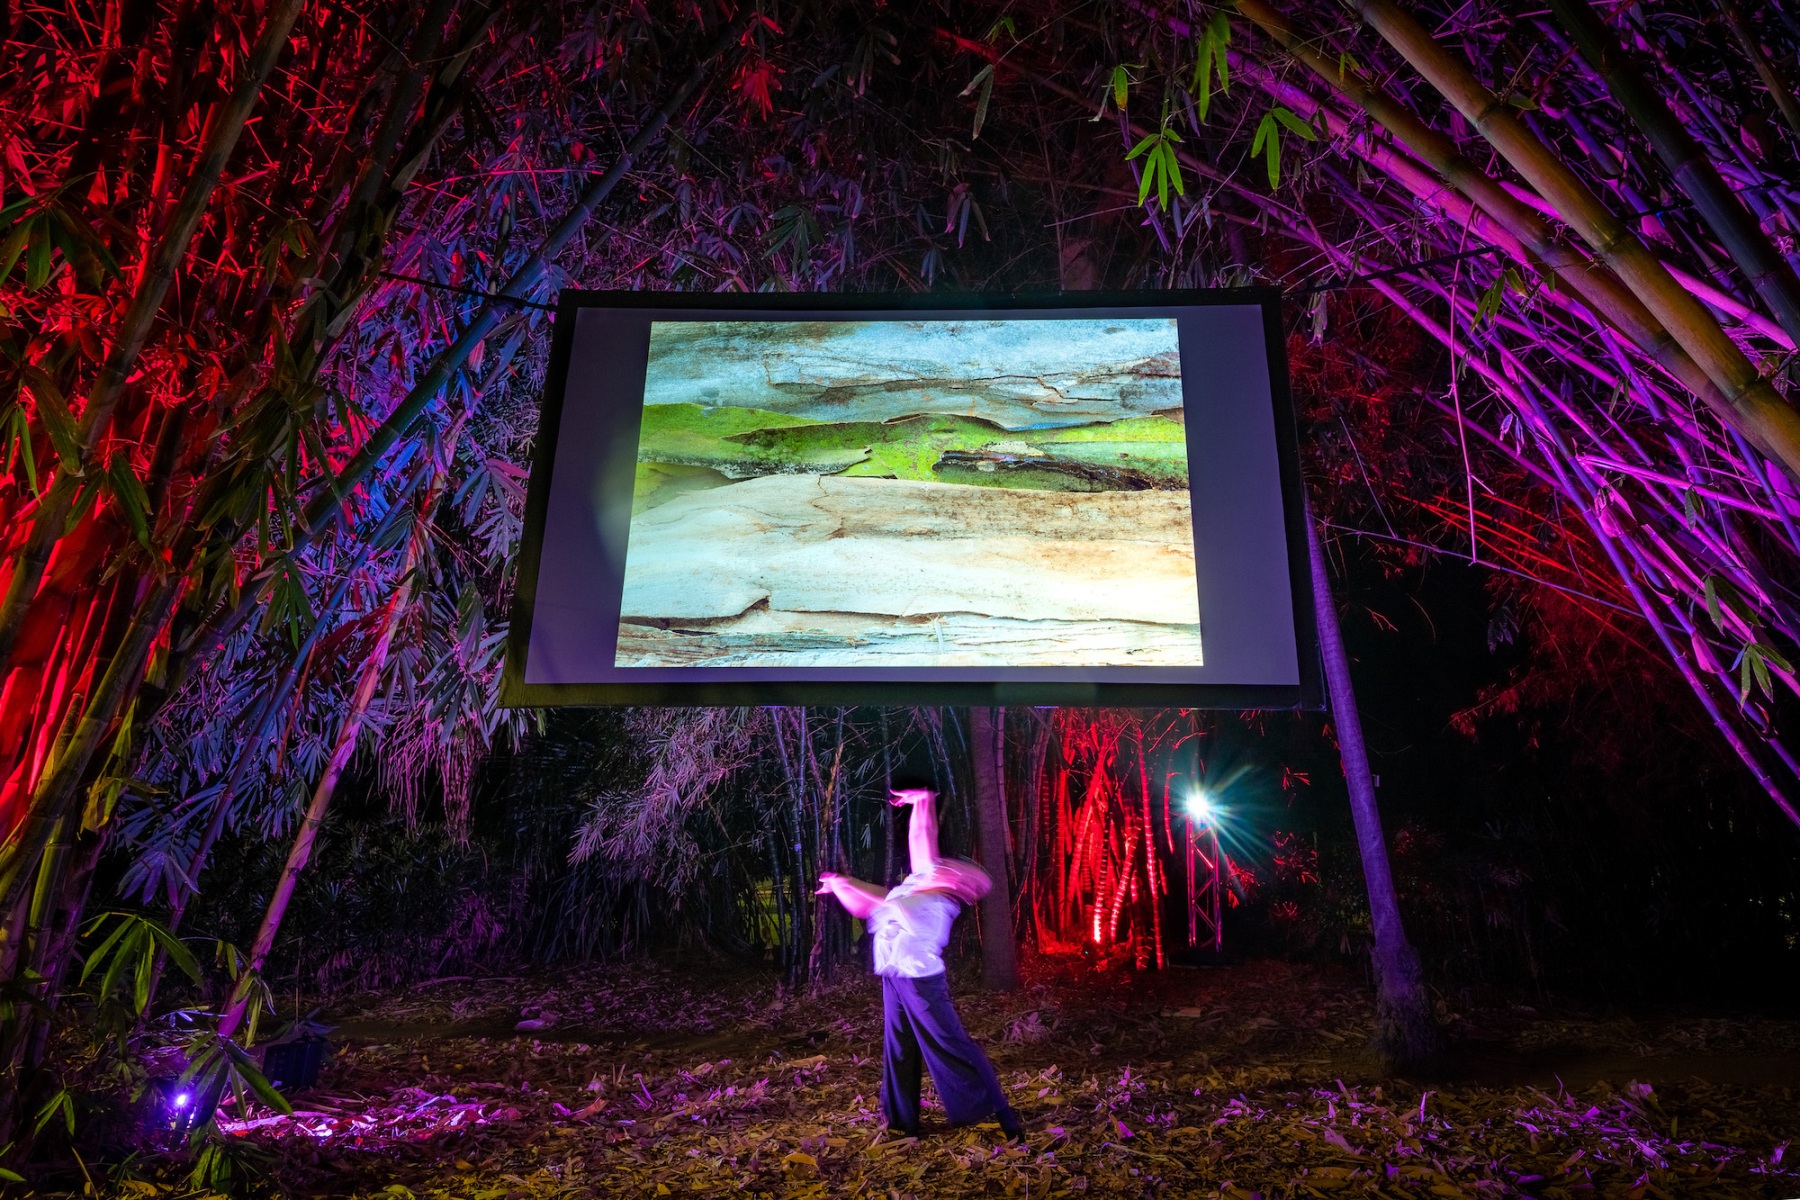 A blurry figure dances beneath a large screen suspended in a bamboo grove, onto which macrophotography of bushlands and riverbeds is displayed